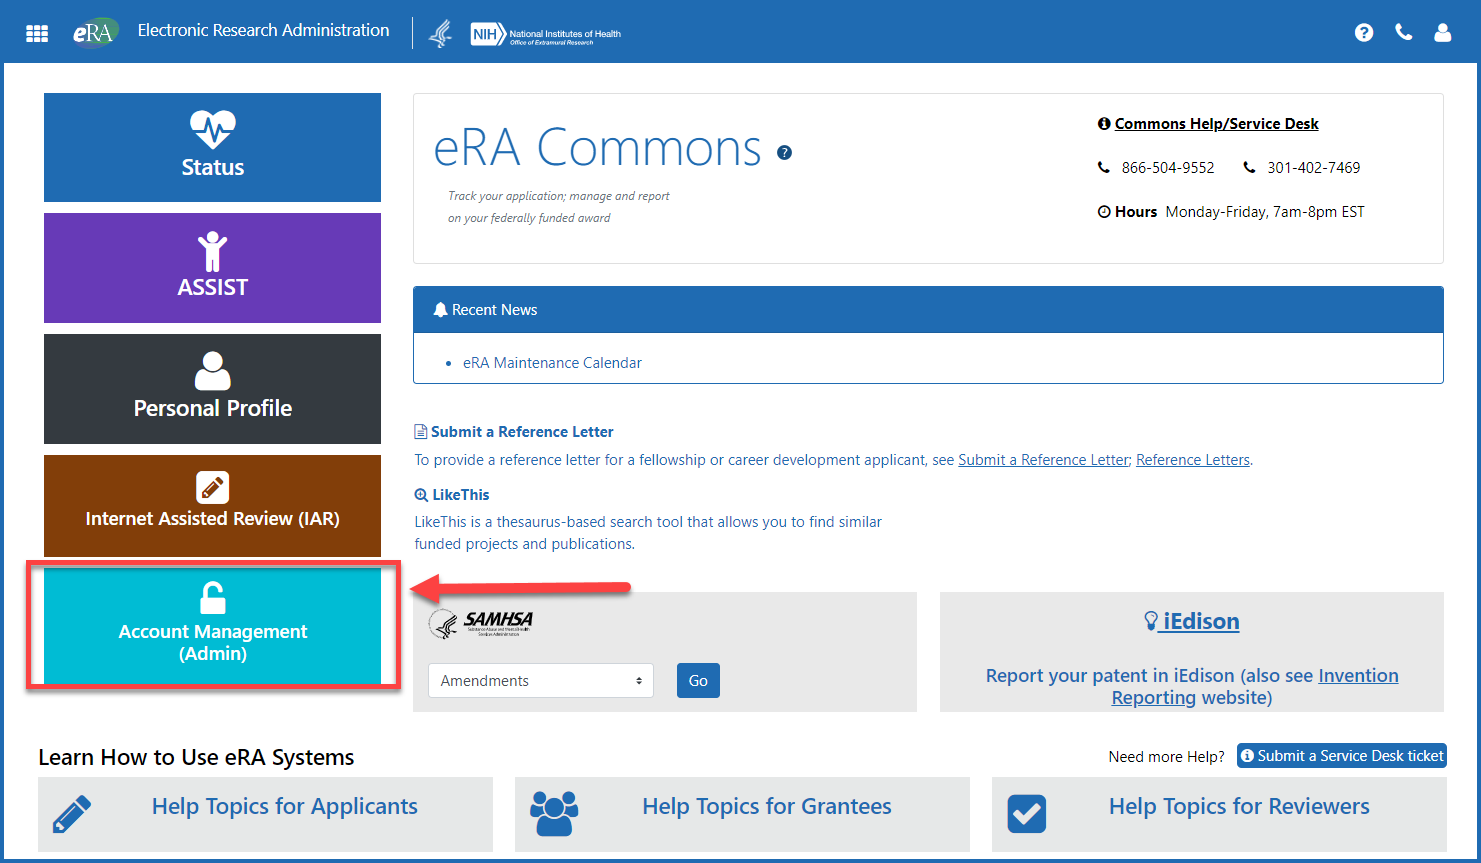 Figure 1: eRA Commons landing page showing the Account Management (Admin) button and the Admin menu option from the apps icon